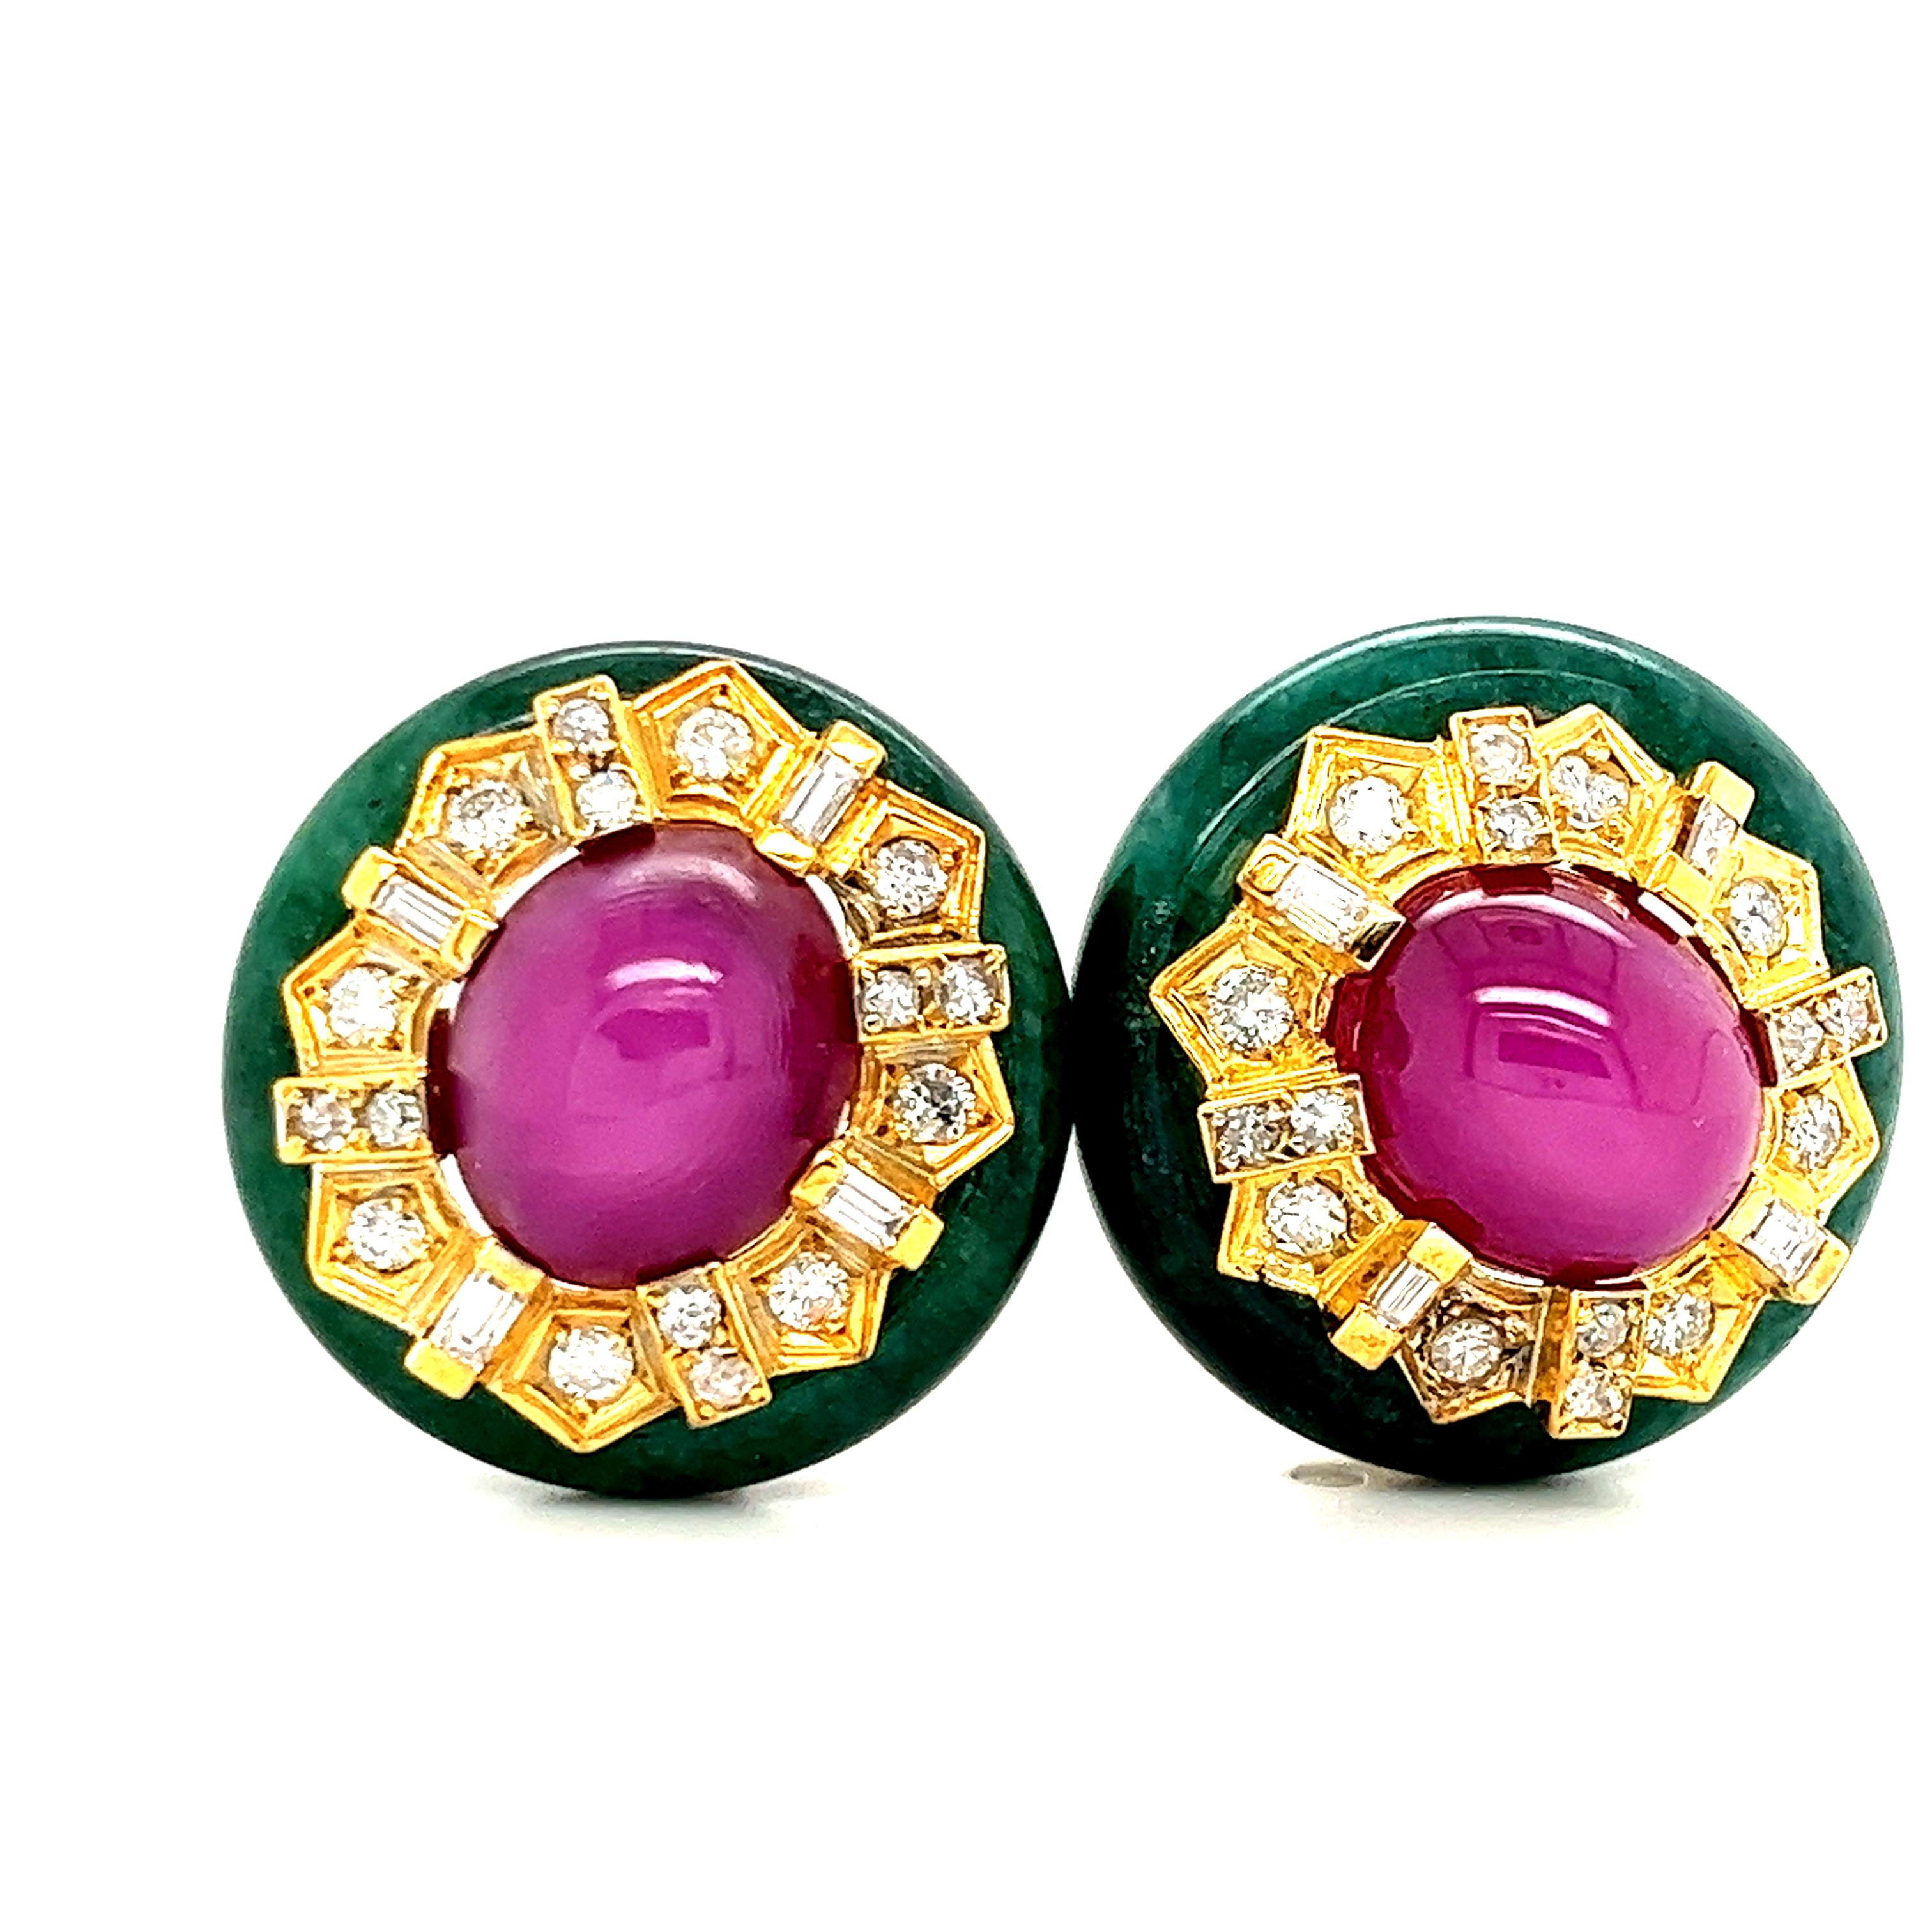 Cabochon-Cut Ruby Jade and Diamond 18K Gold Ring and Earrings Set In Good Condition For Sale In Miami, FL